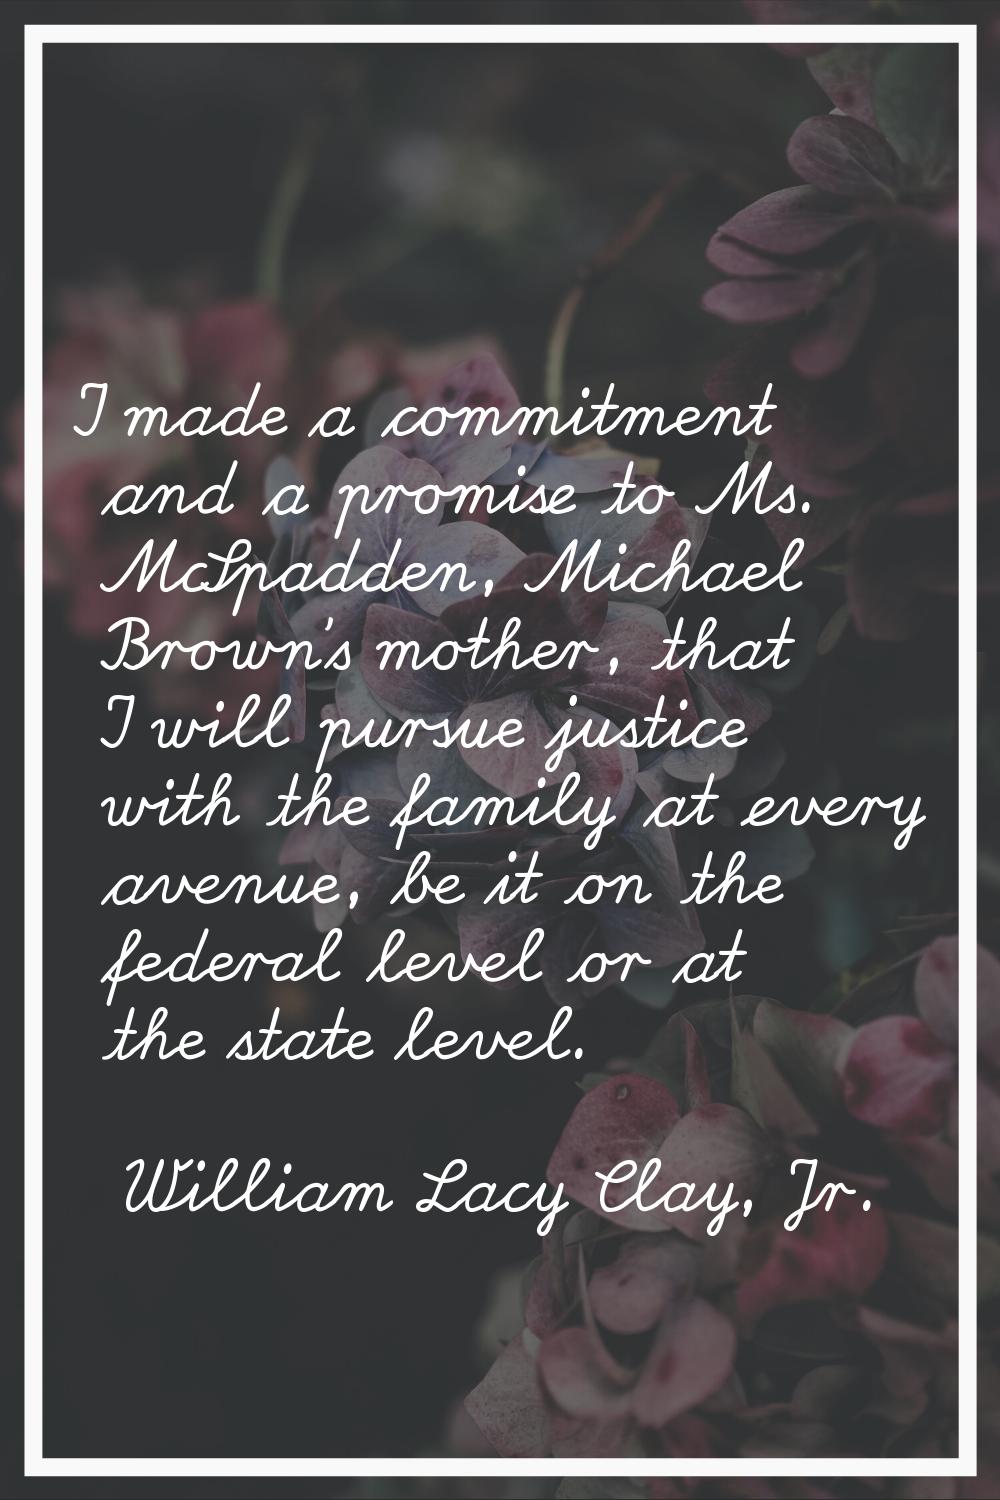 I made a commitment and a promise to Ms. McSpadden, Michael Brown's mother, that I will pursue just